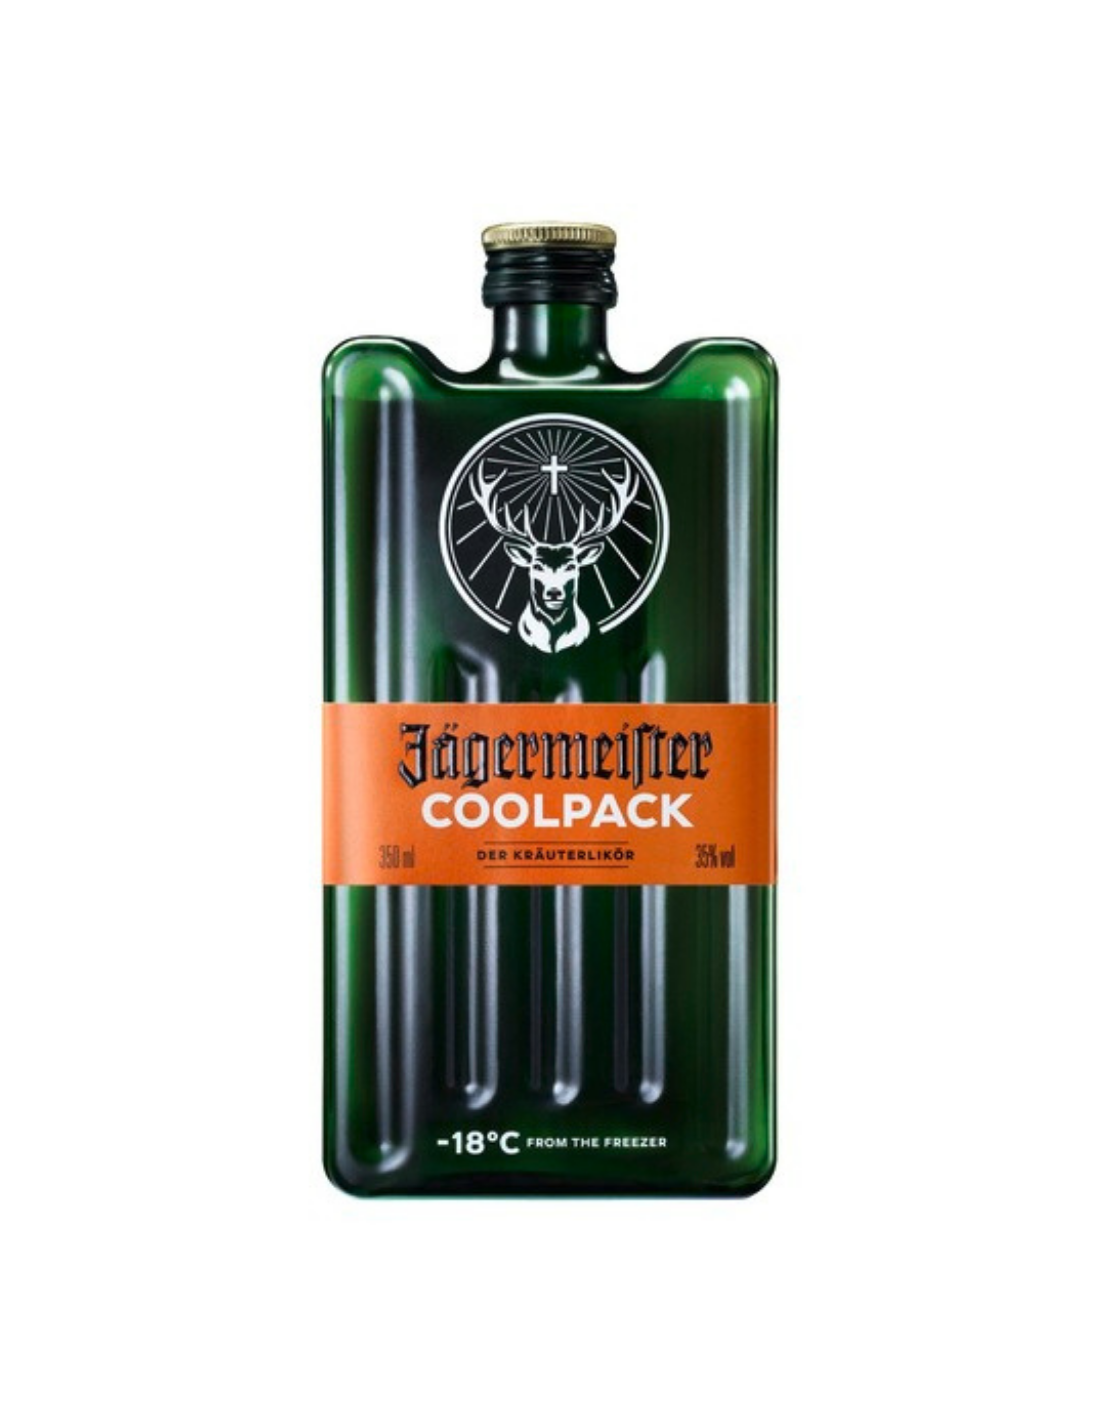 Lichior digestiv Jagermeister Coolpack, 35% alc., 0.35L, Germania alcooldiscount.ro